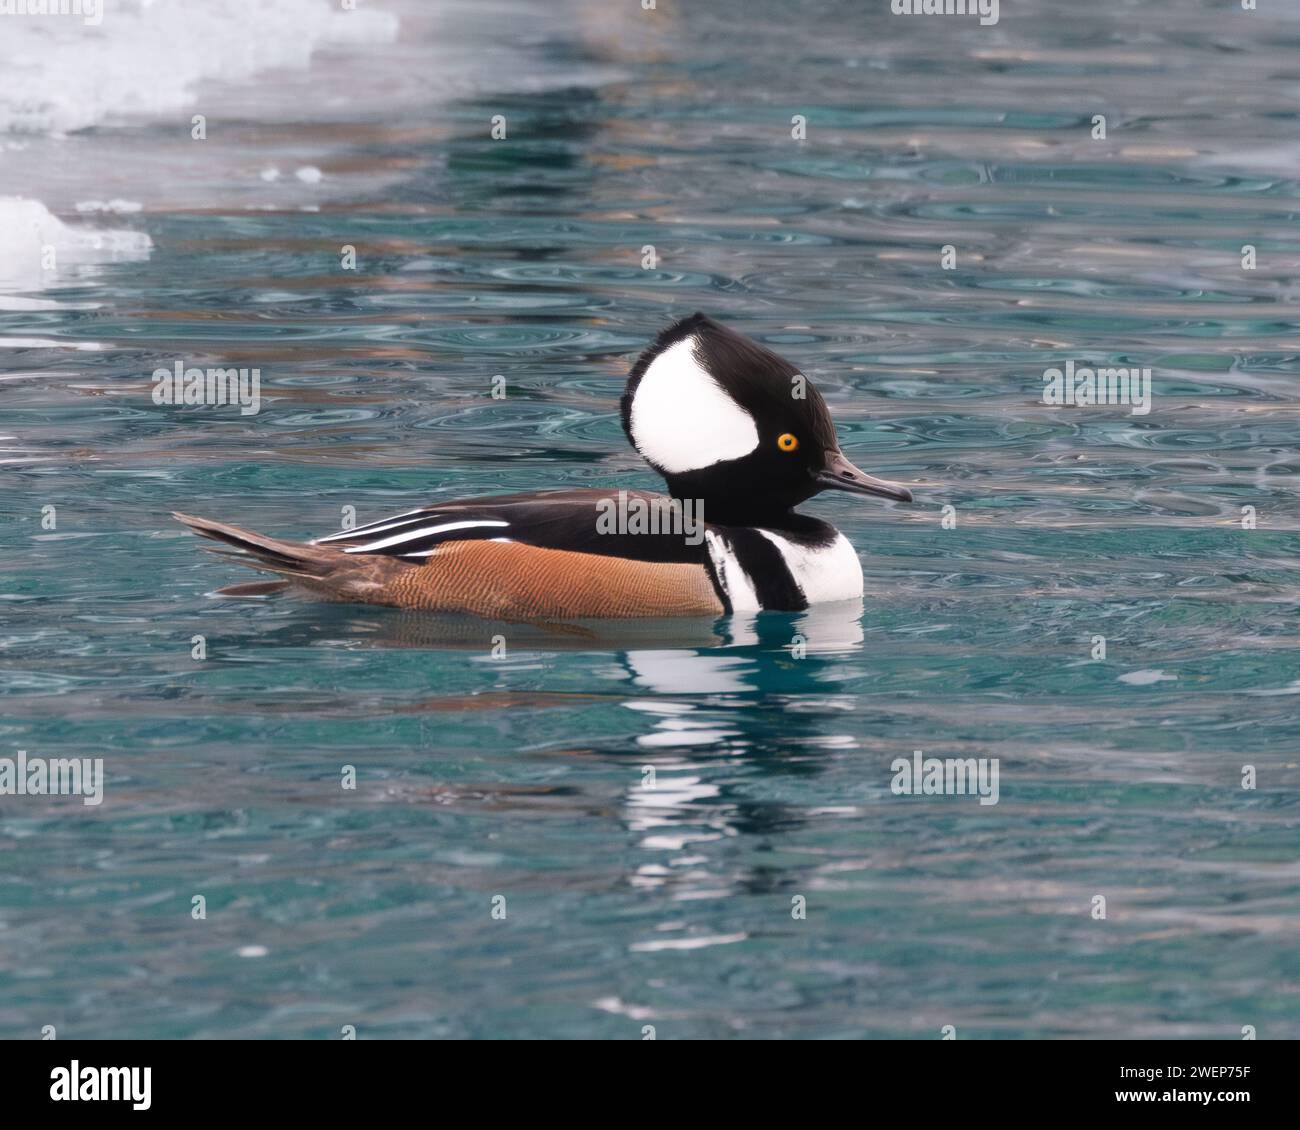 A Hooded Merganser Duck gliding next to icy floe in serene waters Stock Photo